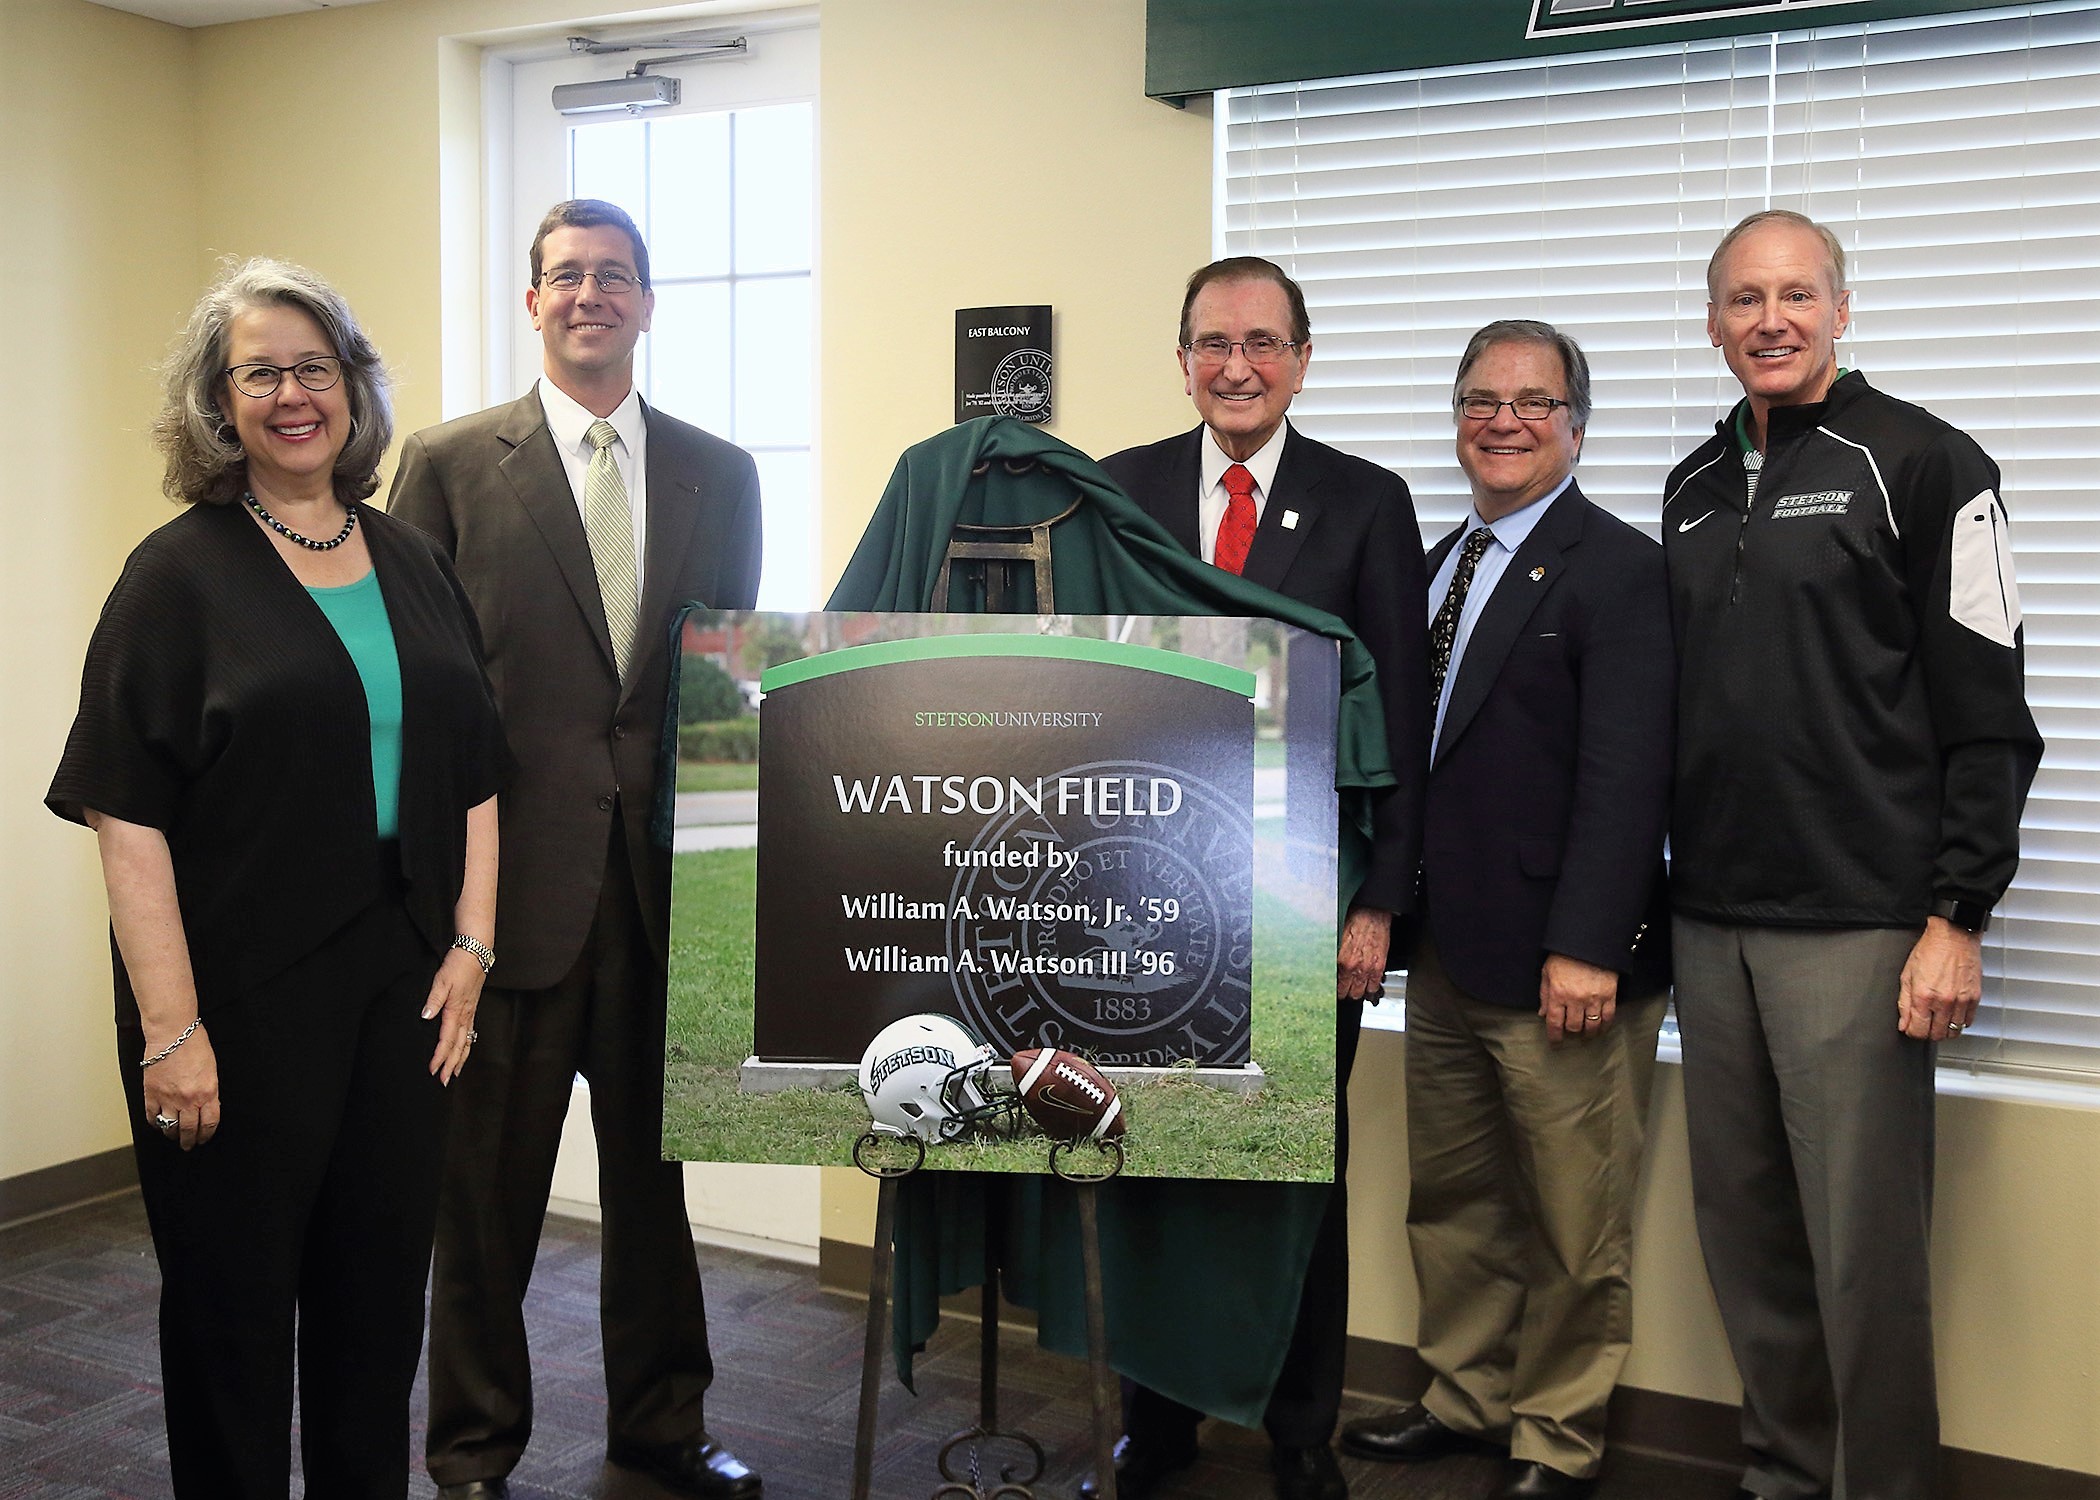 Stetson President Wendy B. Libby, Bill Watson III, William A. Watson, Jr., Stetson Athletics Director Jeff Altier and Stetson Head Football Coach Roger Hughes gather with a photo of the new field sign.